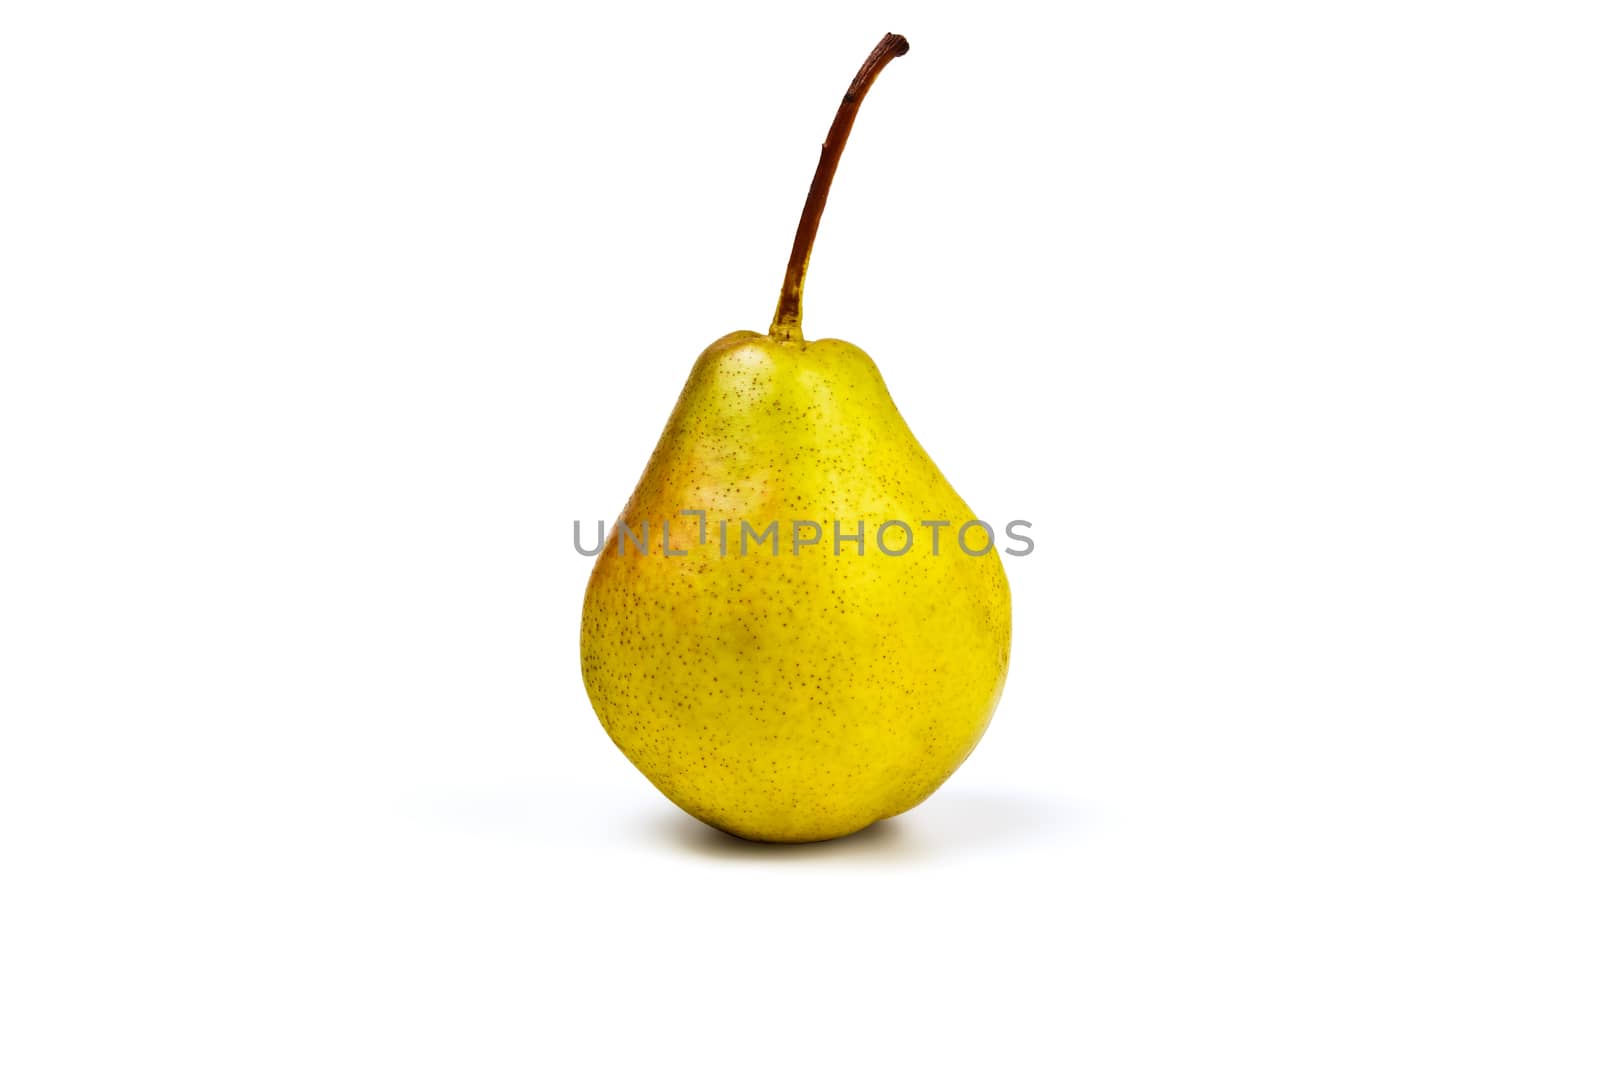 Yellow ripe pear on a white background